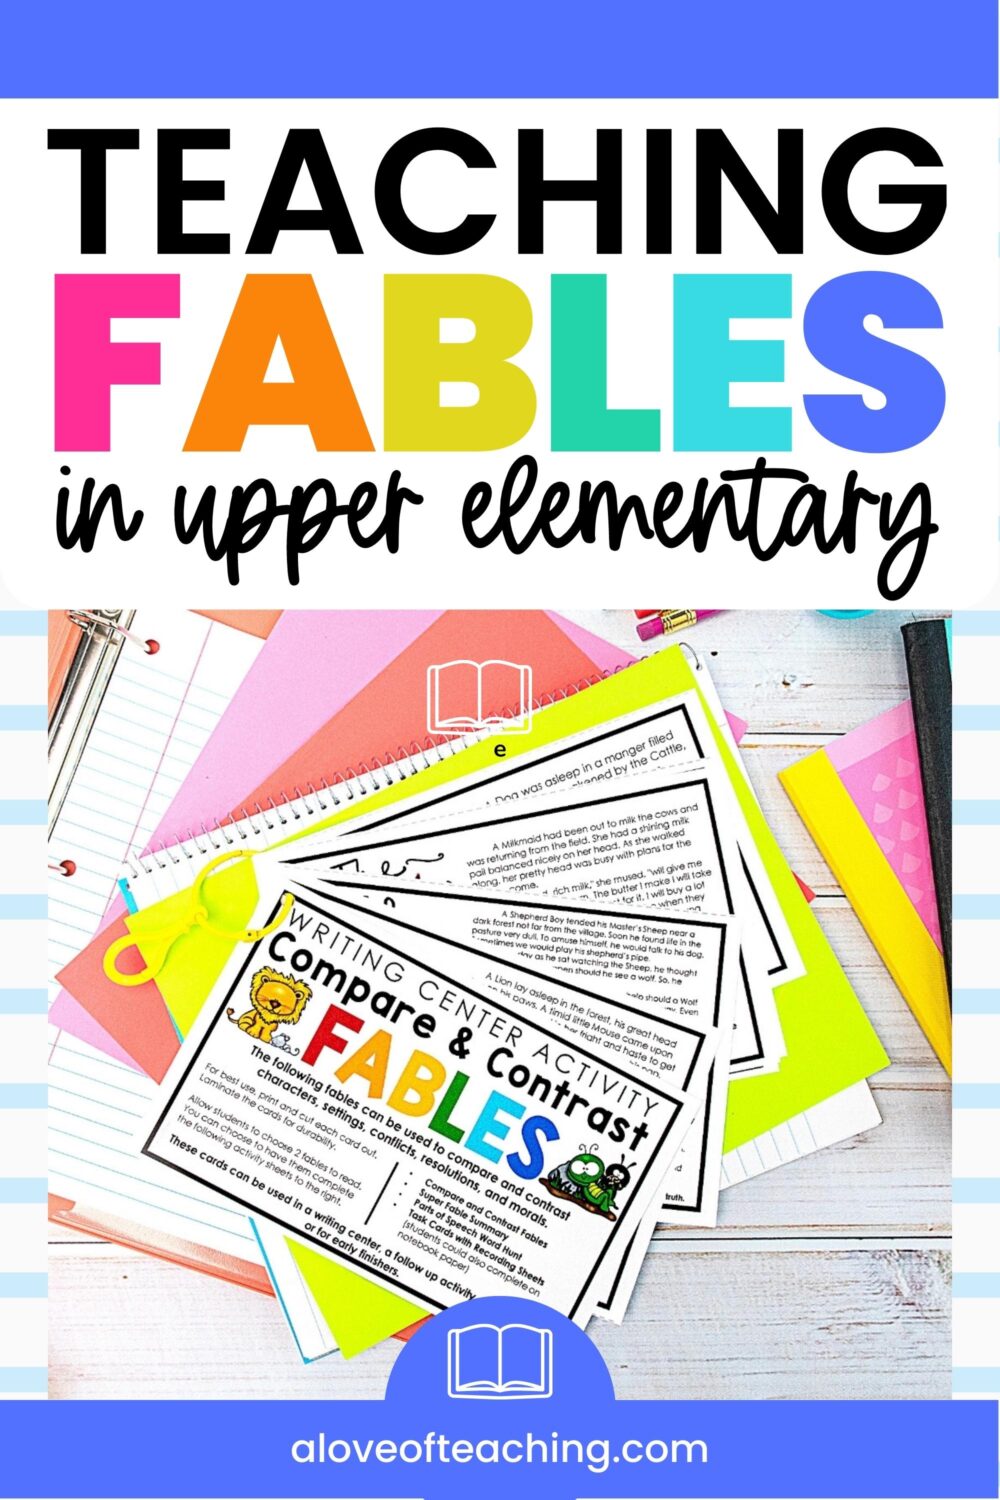 Ideas for Teaching Fables in Upper Elementary